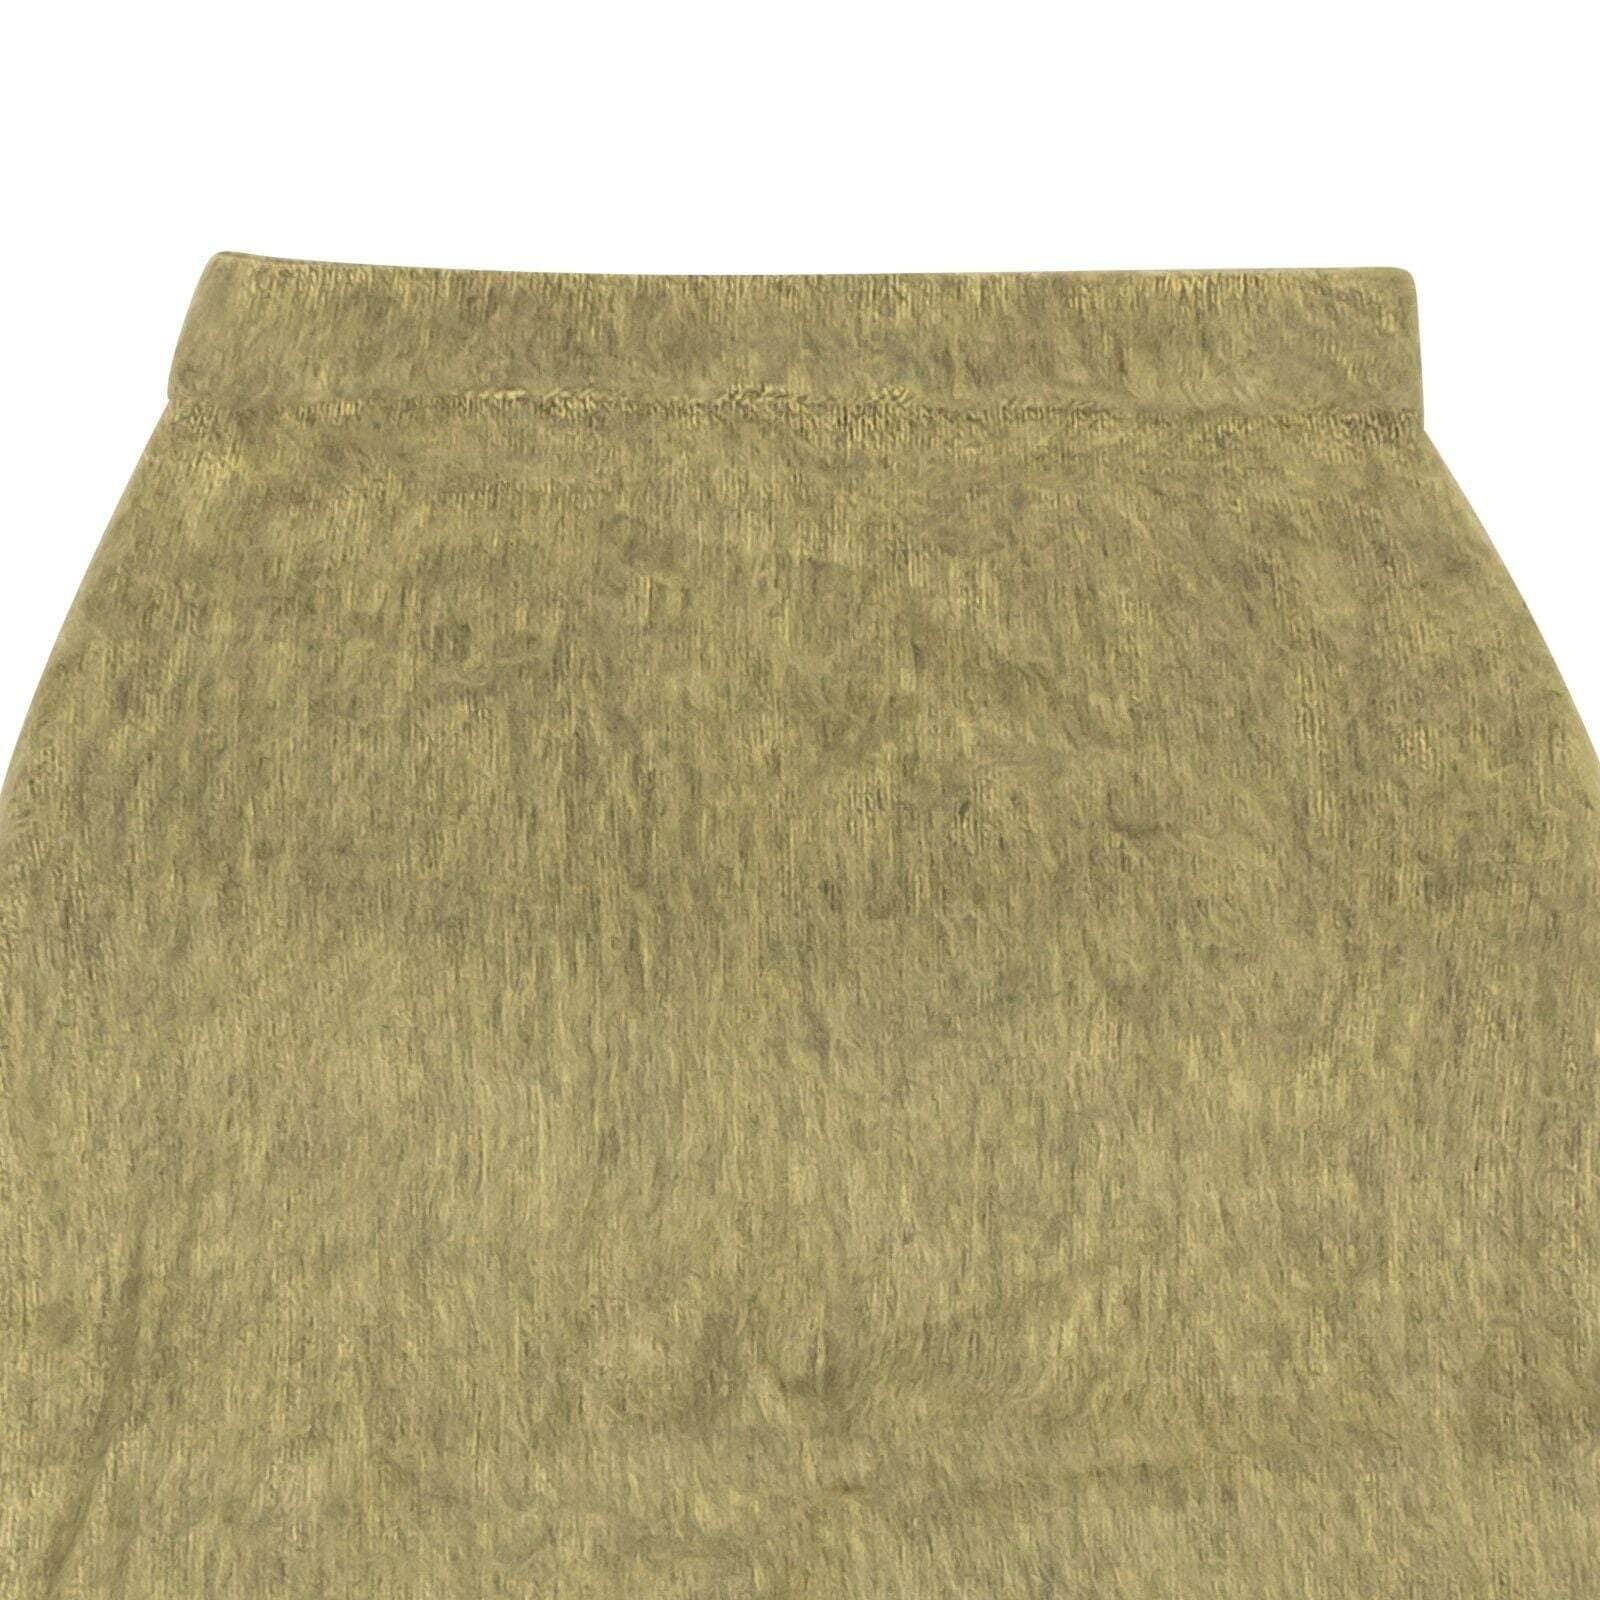 Stussy channelenable-all, chicmi, couponcollection, gender-womens, main-clothing, size-m, size-s, size-xs, stussy, under-250, womens-flared-skirts Sand Tan Acrylic Marsh Midi Skirt